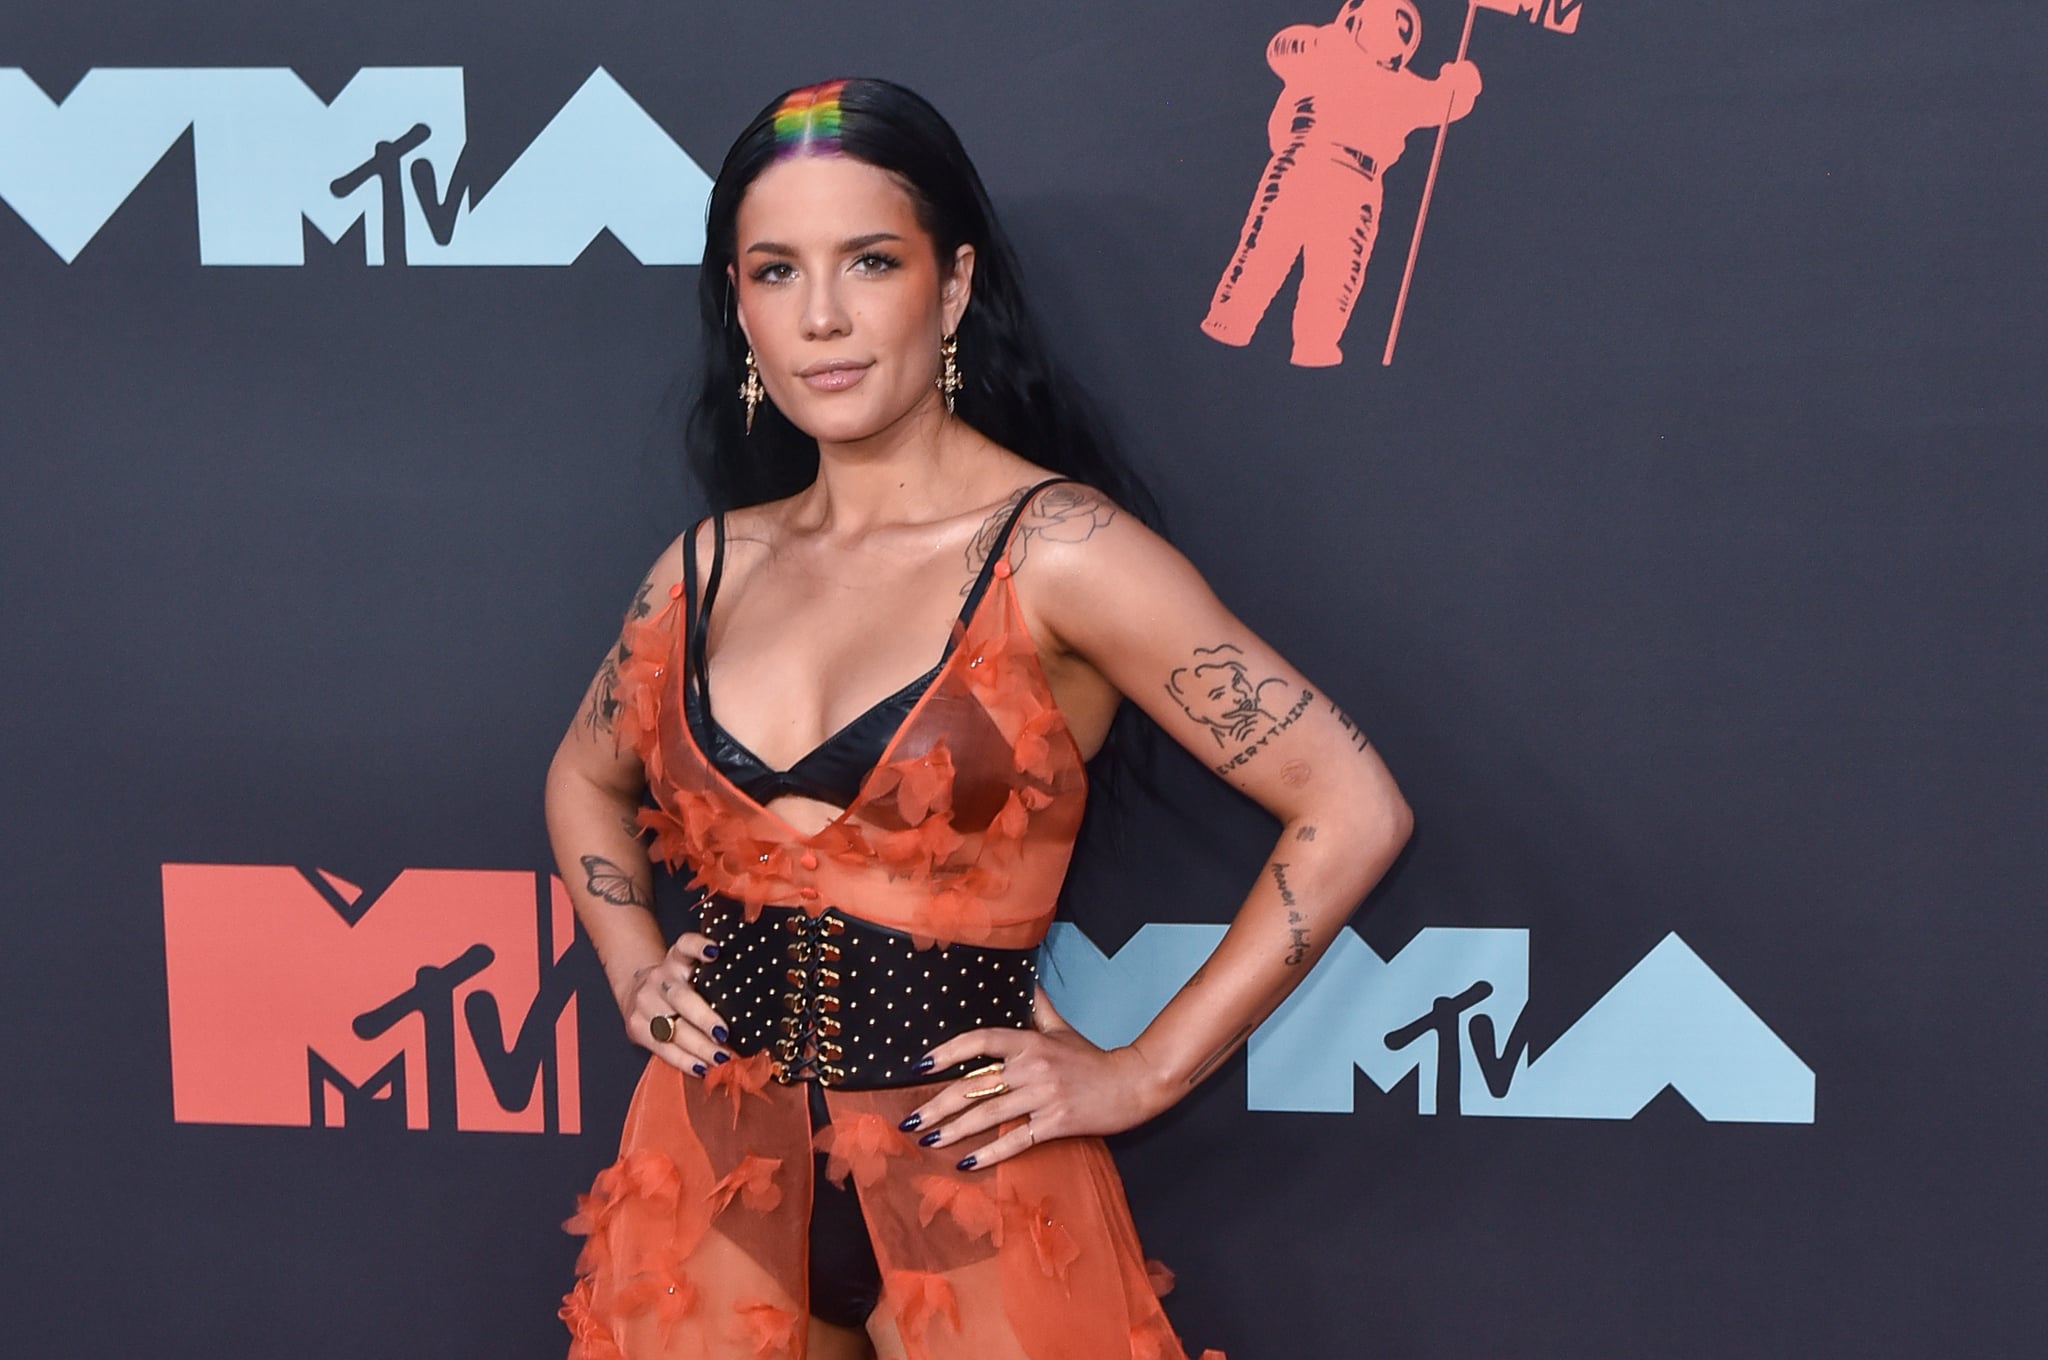 NEWARK, NEW JERSEY - AUGUST 26: Halsey attends the 2019 MTV Video Music Awards red carpet at Prudential Centre on August 26, 2019 in Newark, New Jersey. (Photo by Aaron J. Thornton/Getty Images)